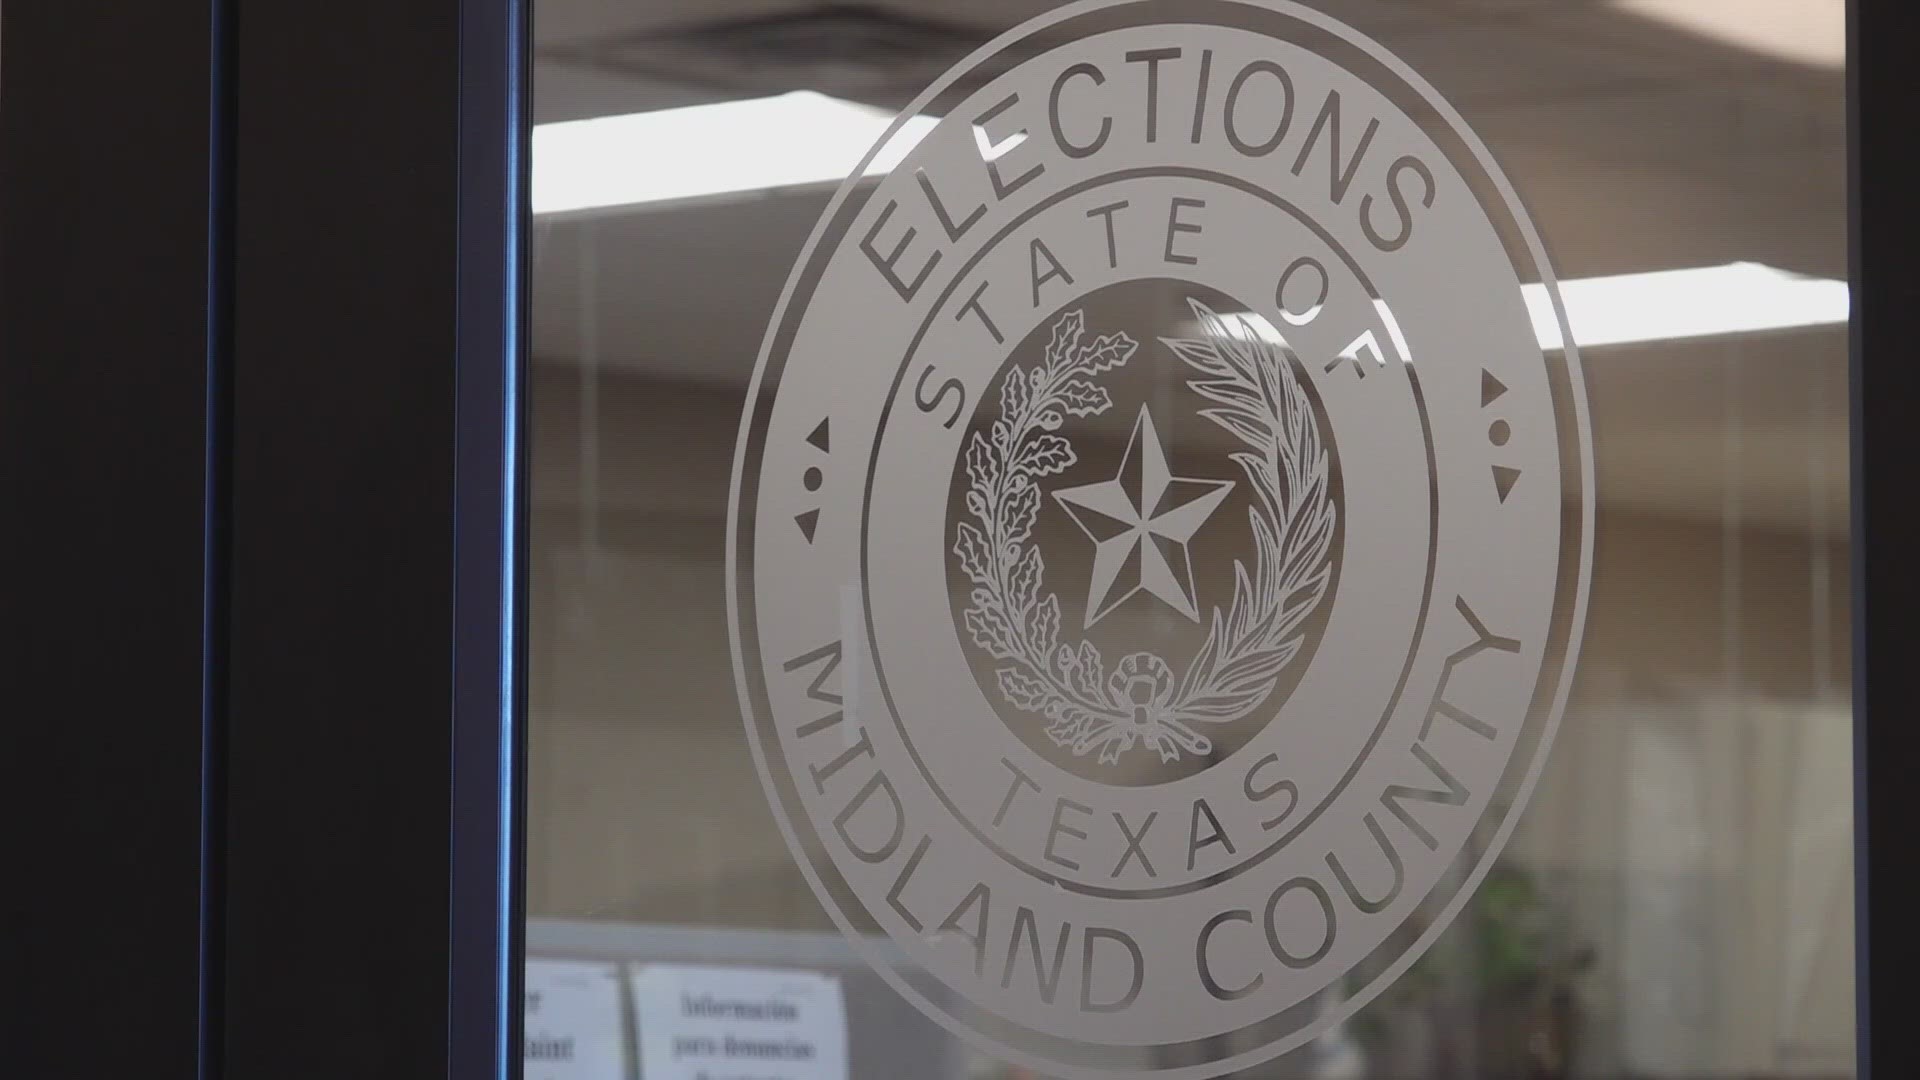 Only 17.5% of voters in Midland County hit the polls during the March elections.